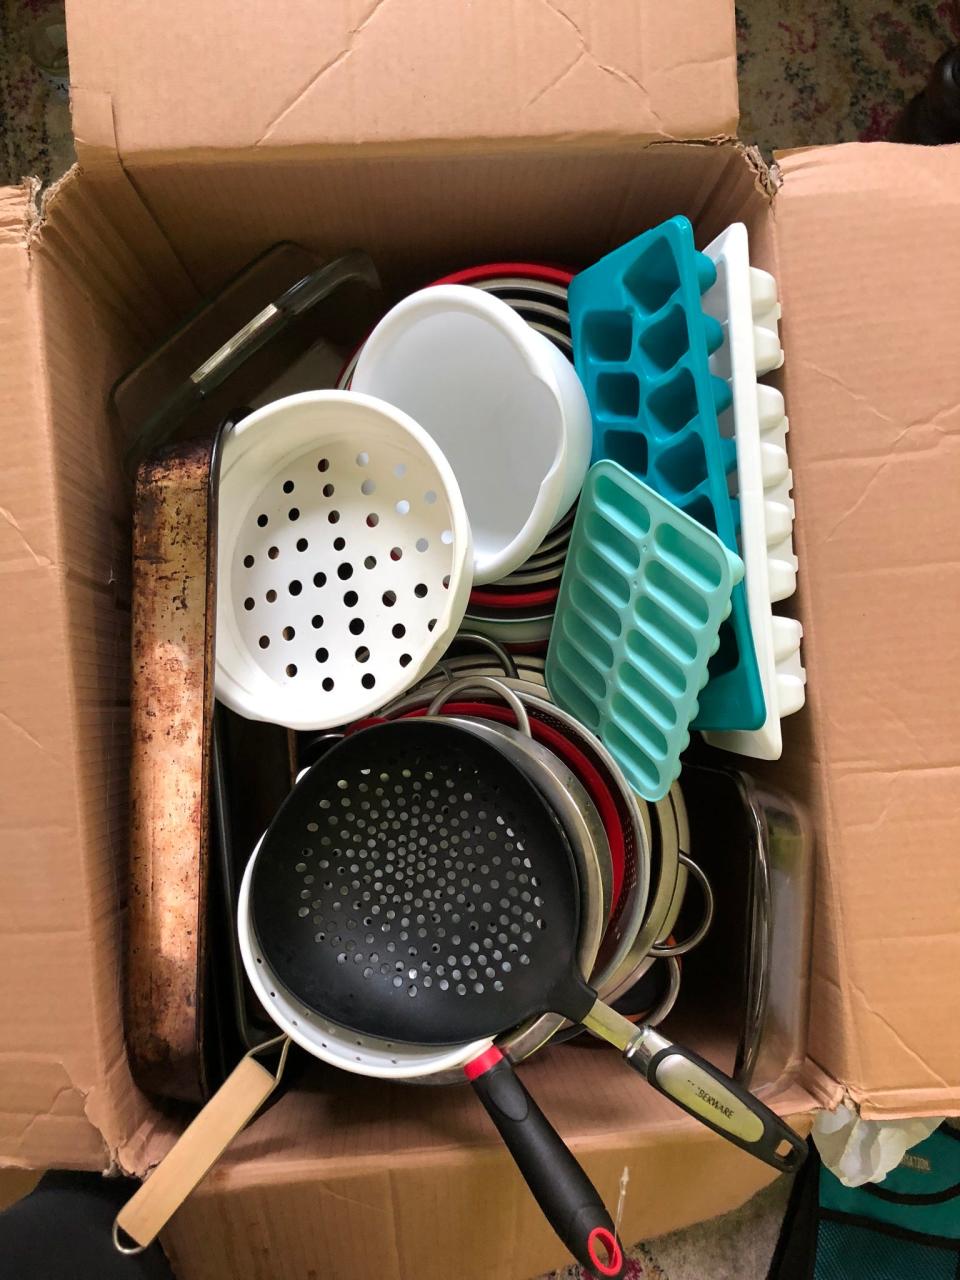 Pots, pans and ice cube trays donated by Binghamton University students when they move out in May. All items are cleaned and donated to local organizations that can use them as part of the Binghamton Move Out Project.